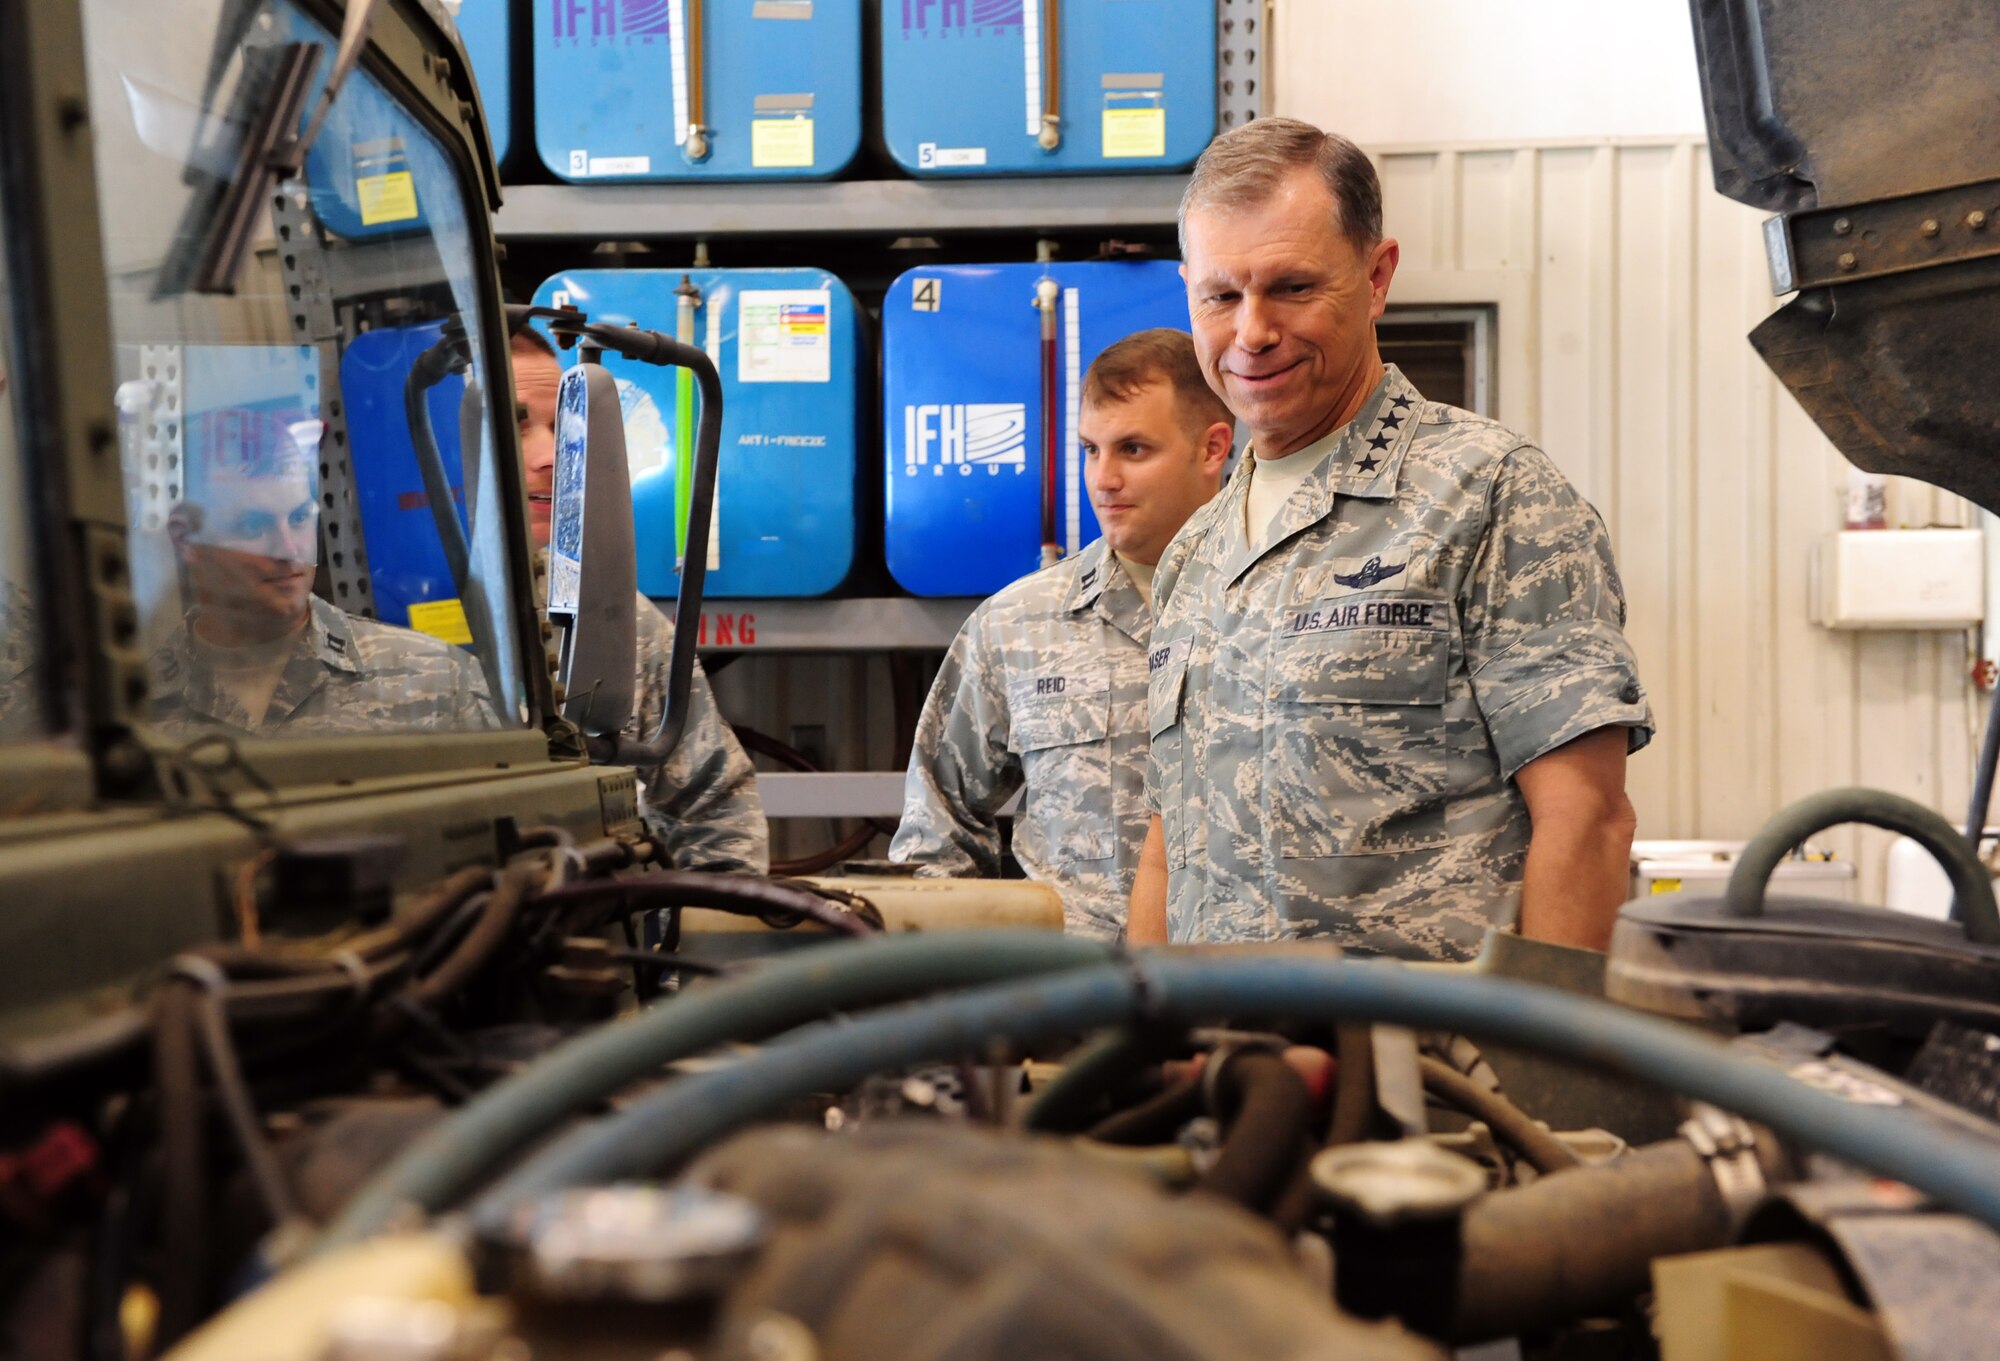 100616-F-6838W-047
SHAW AIR FORCE BASE, S.C.--Gen. William M. Fraser, Air Combat commander, inspects a vehicle at the 682nd Air Operations Support Squadron here June 16, 2010. General Fraser and his wife visited Shaw to gain insight into the mission and speak with Airmen from units across the base to hear their concerns.  (U.S. Air Force photo/Airman 1st Class Neil D. Warner)
